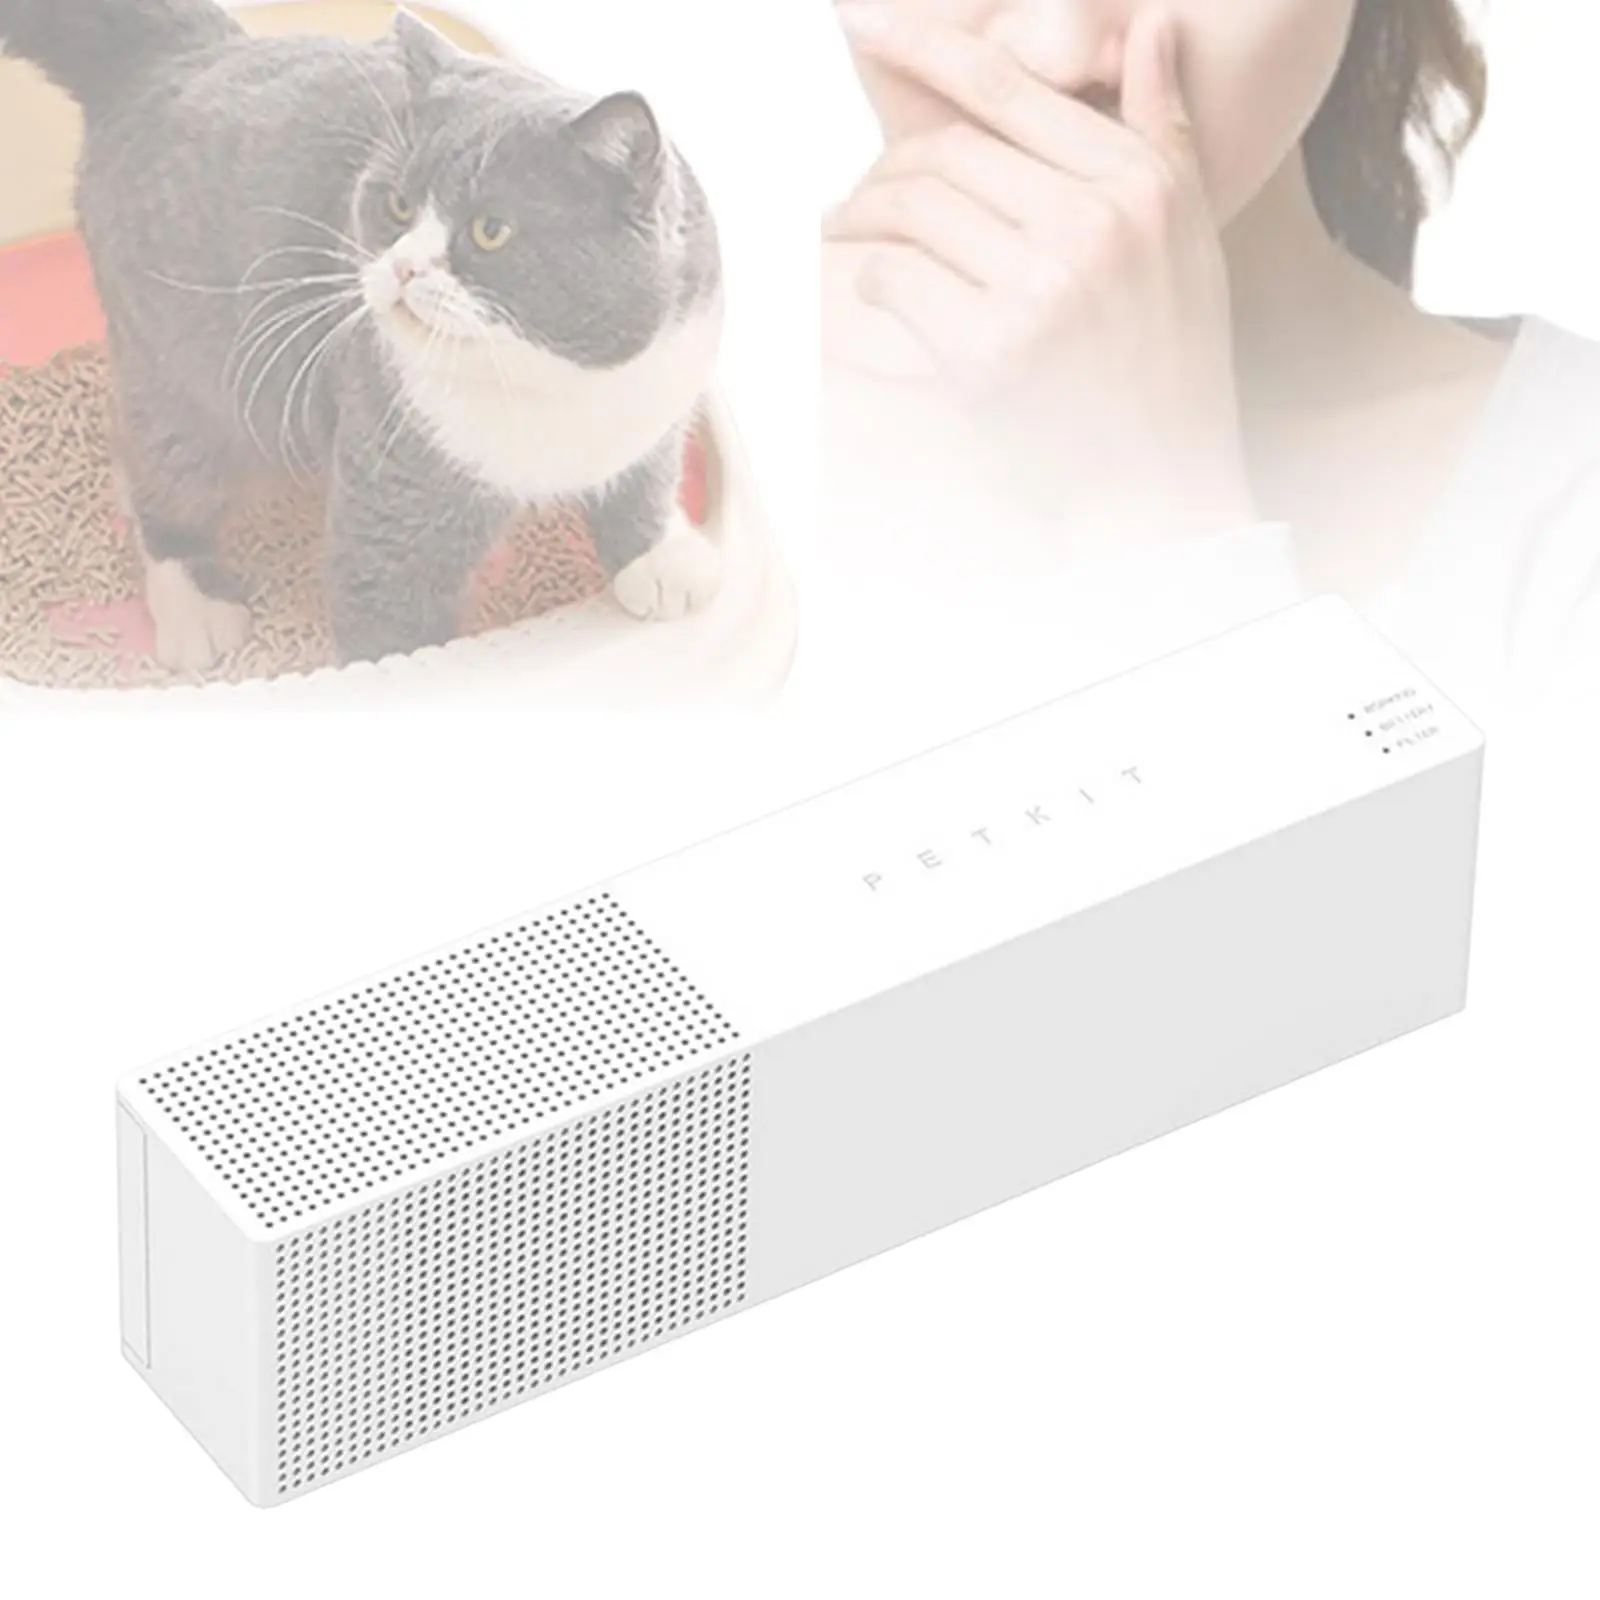 Cat Litter Odor Remover Wall Mounted Smart Cat Litter Freshener Portable Low Noise Cat Litter Deodorizer for Small Area Home